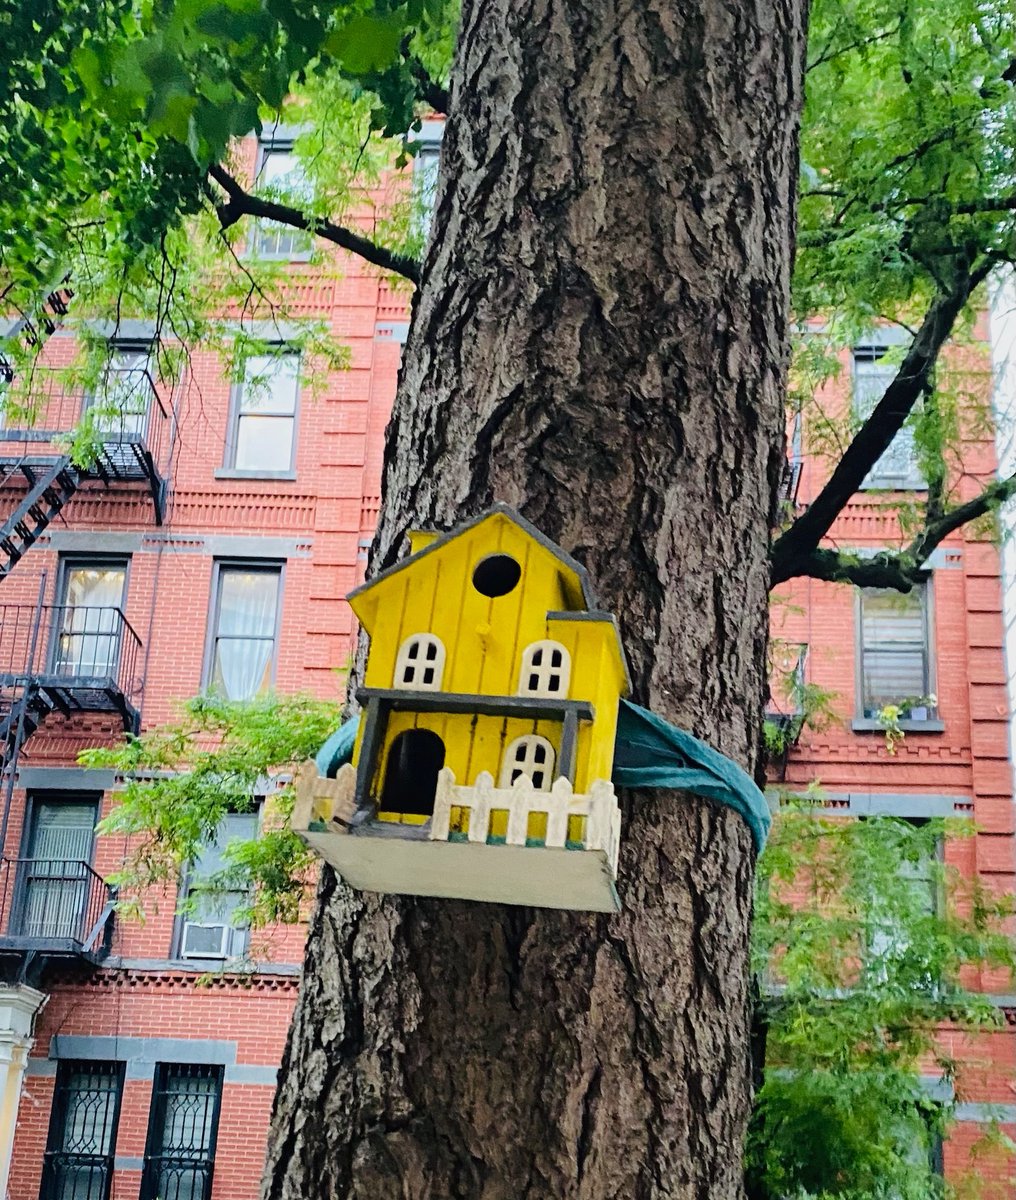 Someone is going around NYC hanging up these little birdhouses and I’m dead now